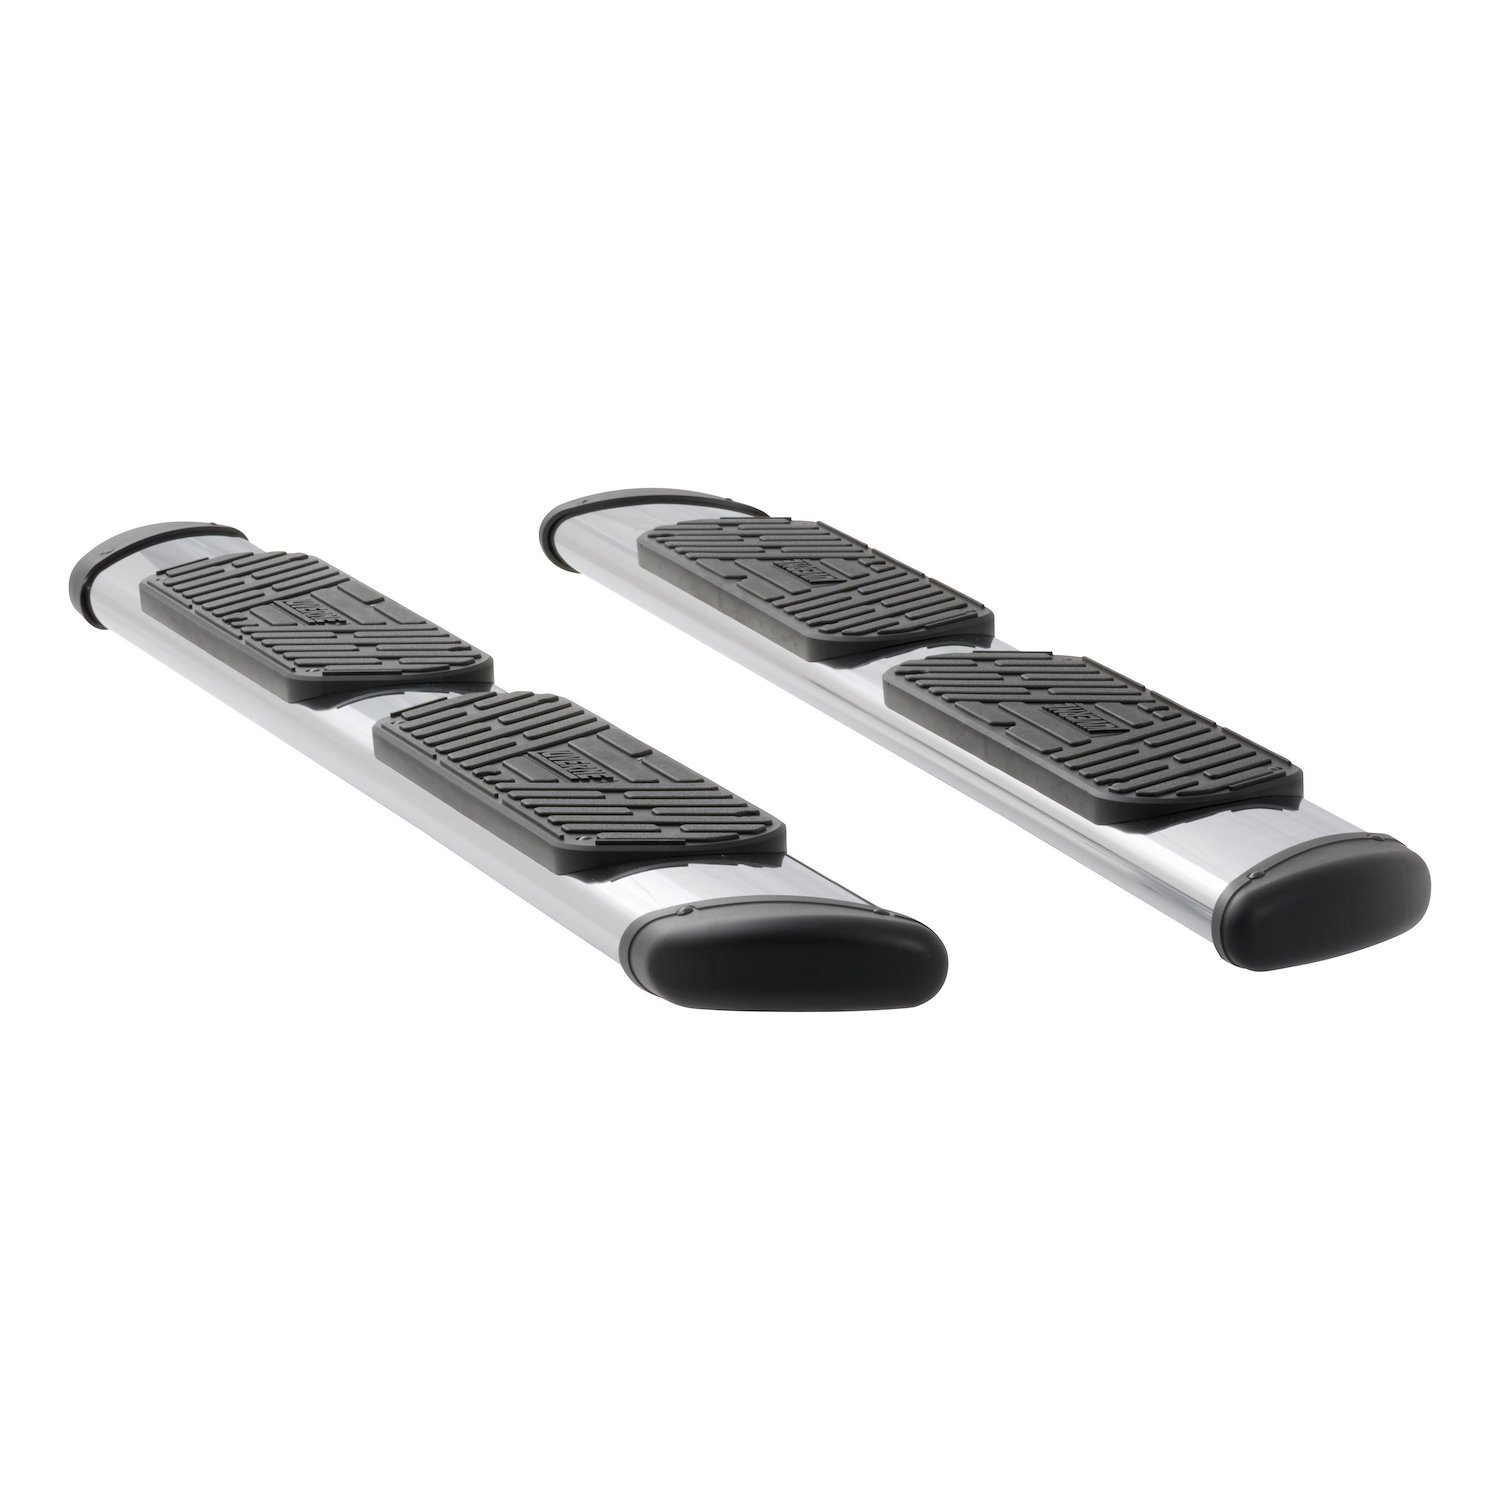 477078-401113 Regal 7 Polished Stainless 78 in. Oval Side Steps Fits Select Chevy Silverado, GMC Sierra